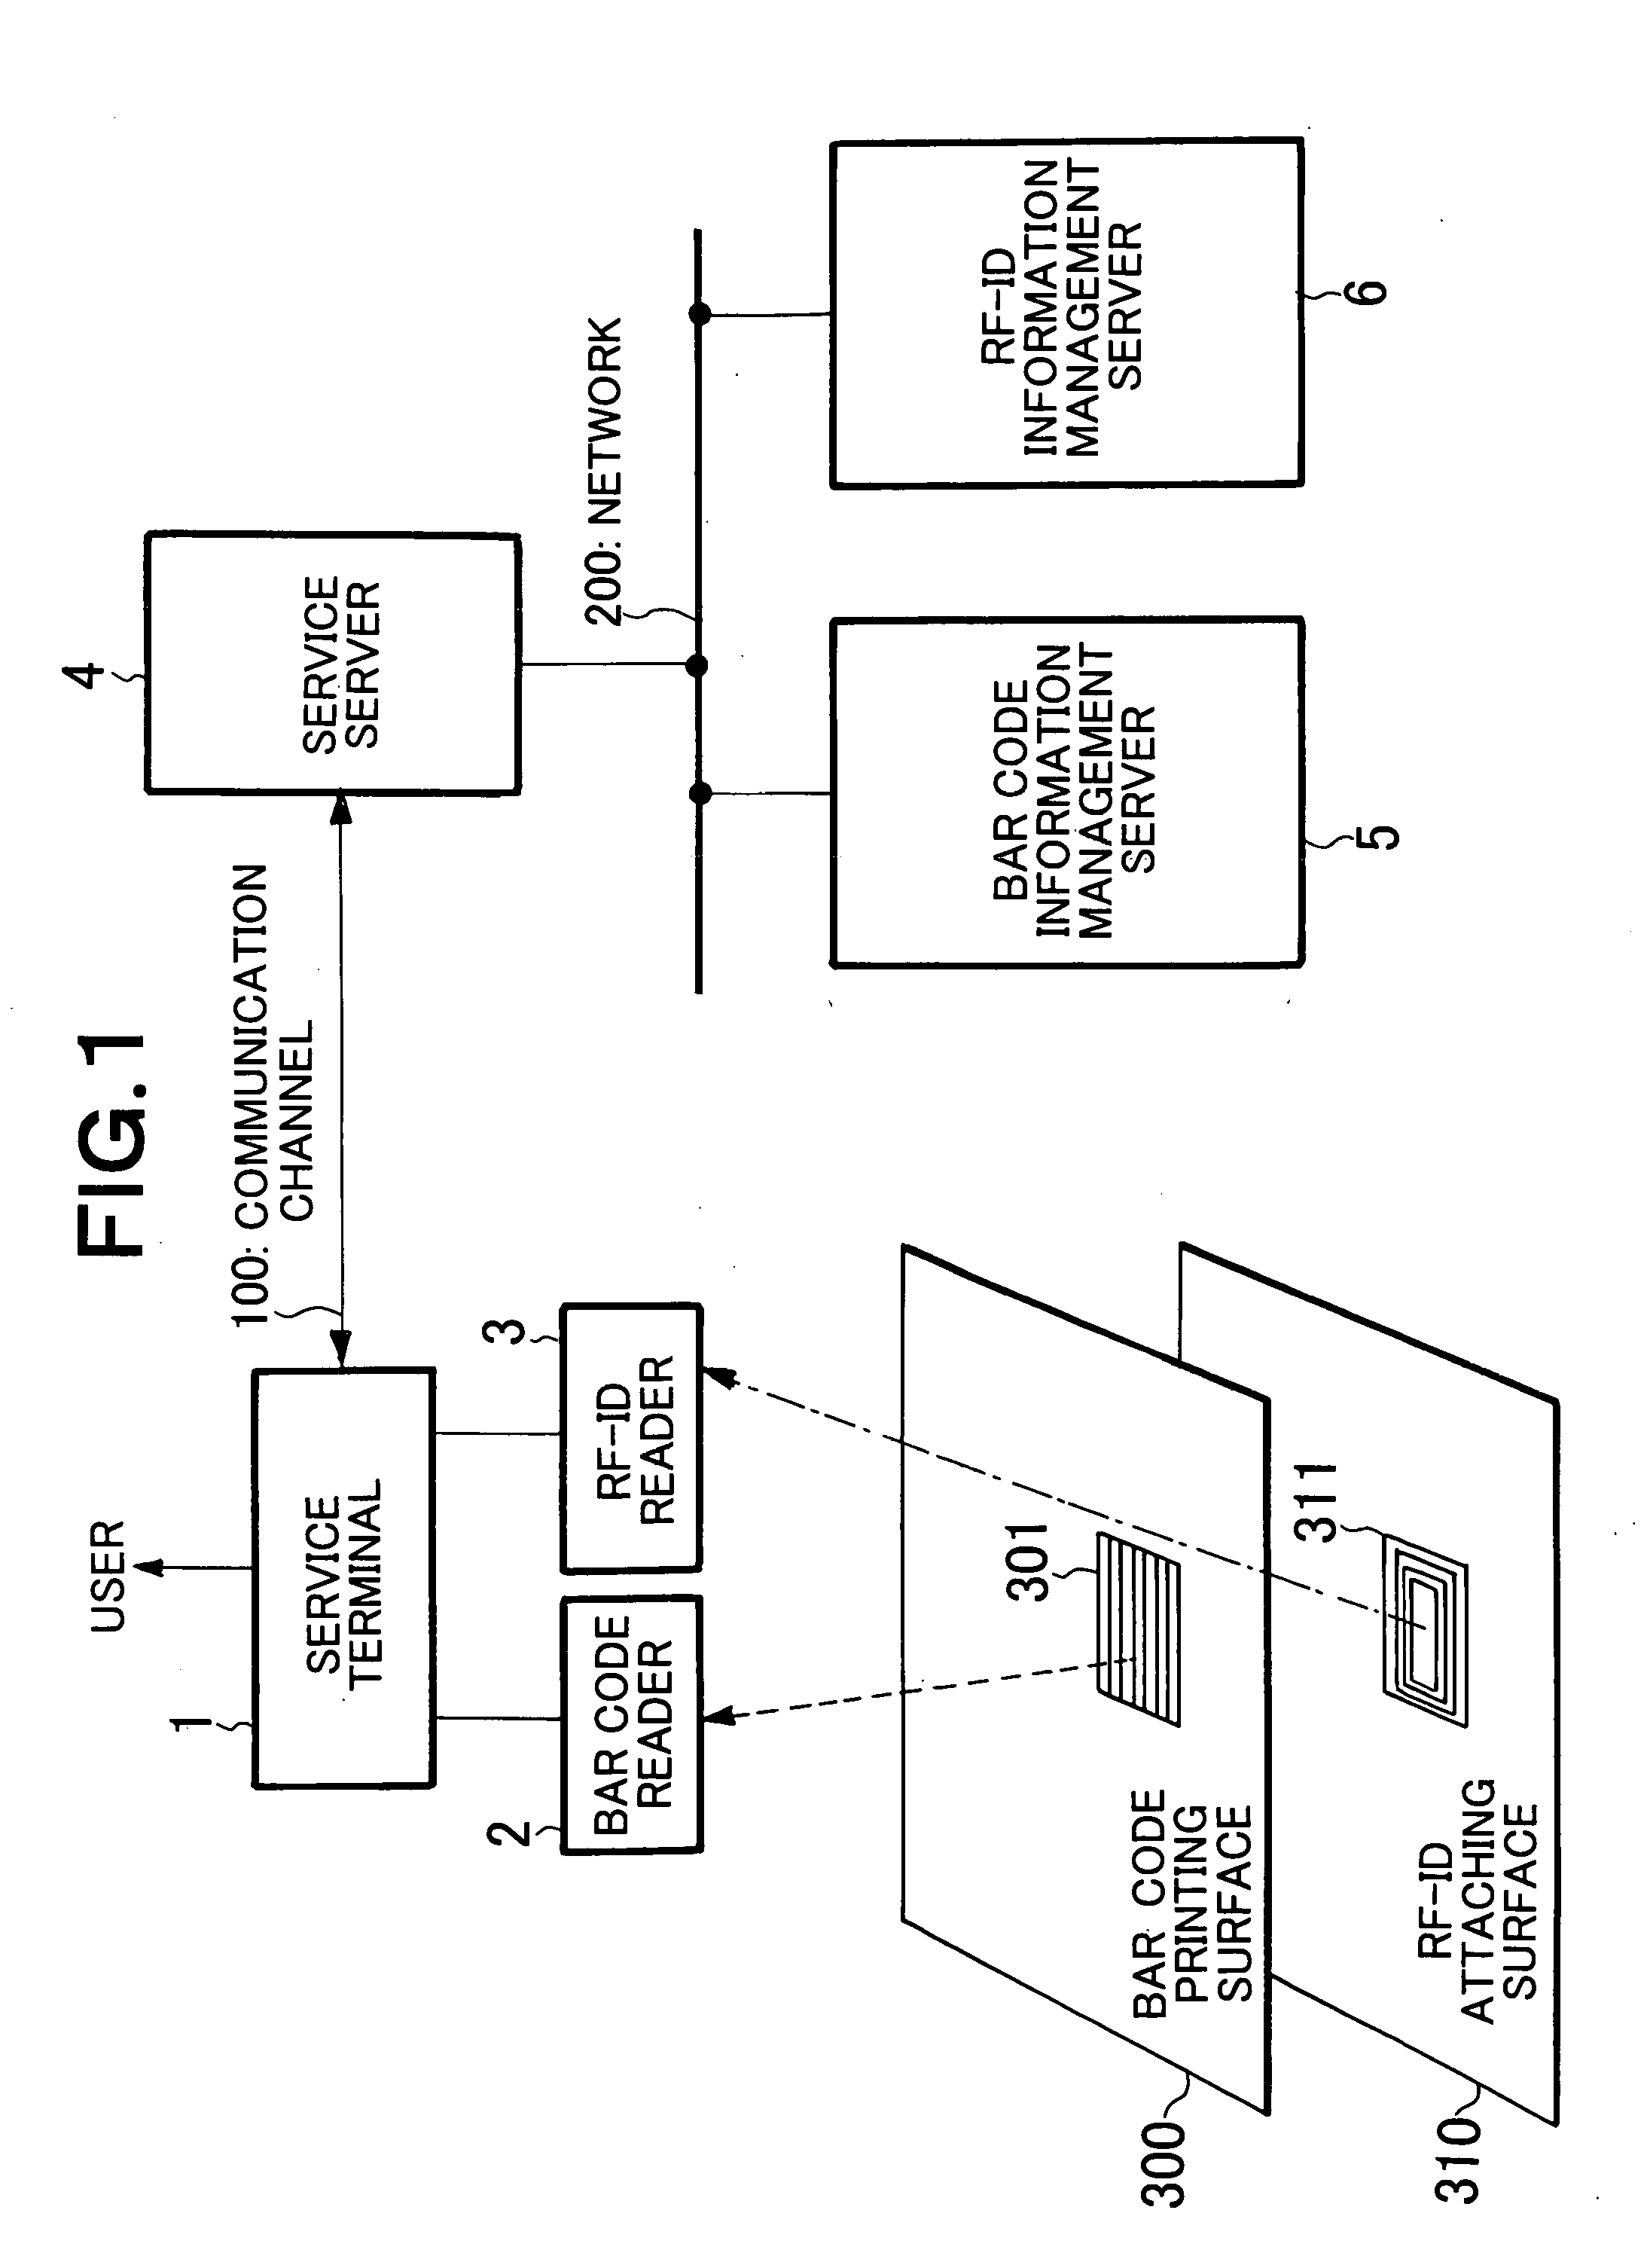 Information processing device for using bar code and radio frequency-identification tag